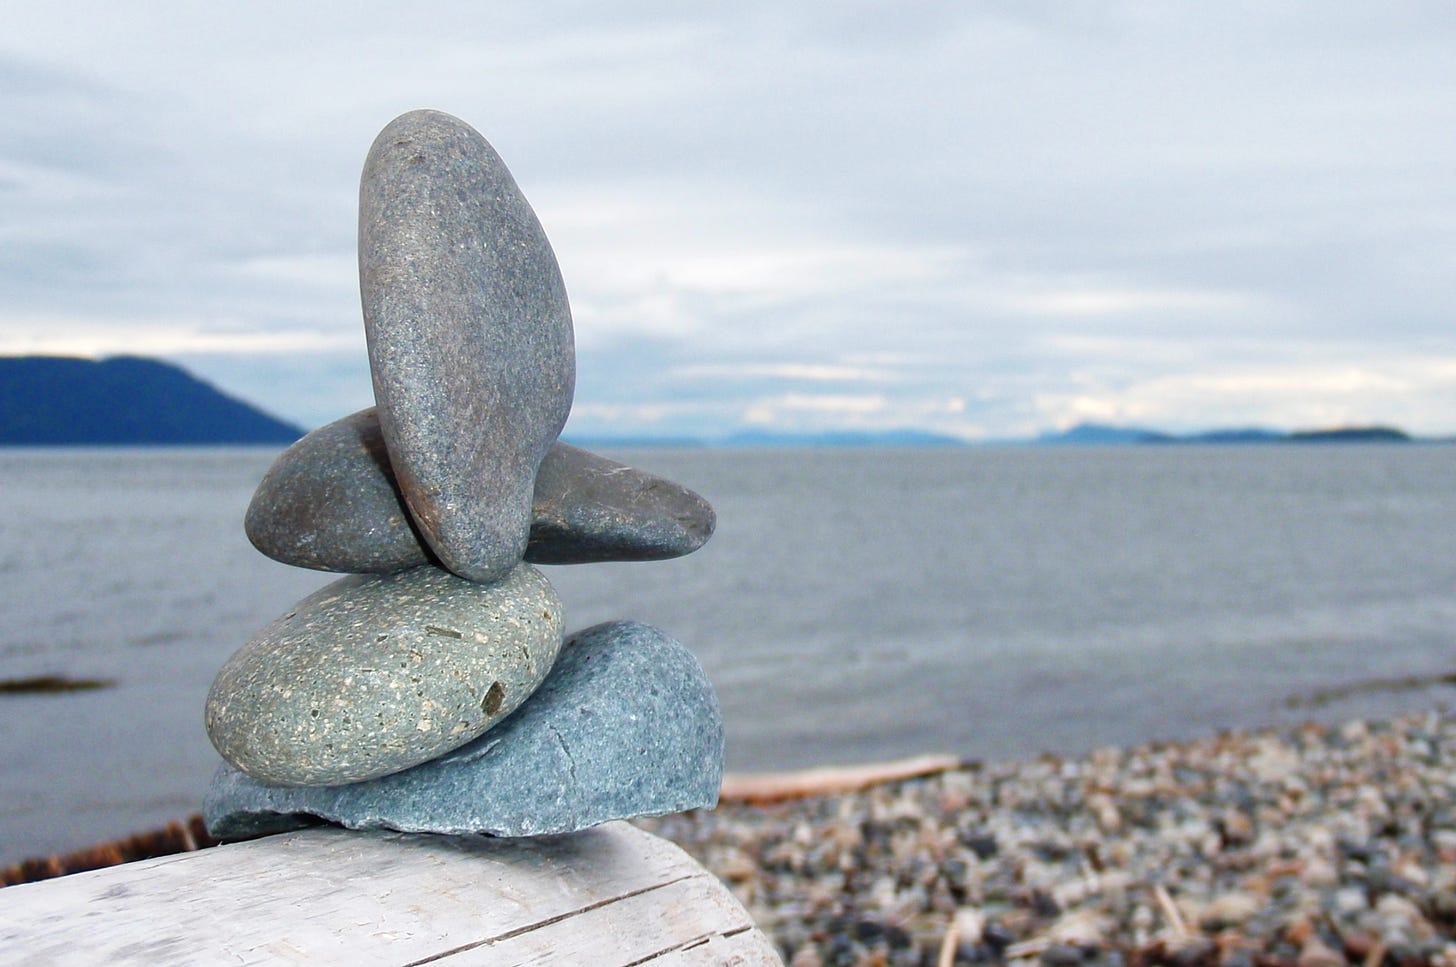 A cairn of smooth stones rests on driftwood against a view of the horizon.